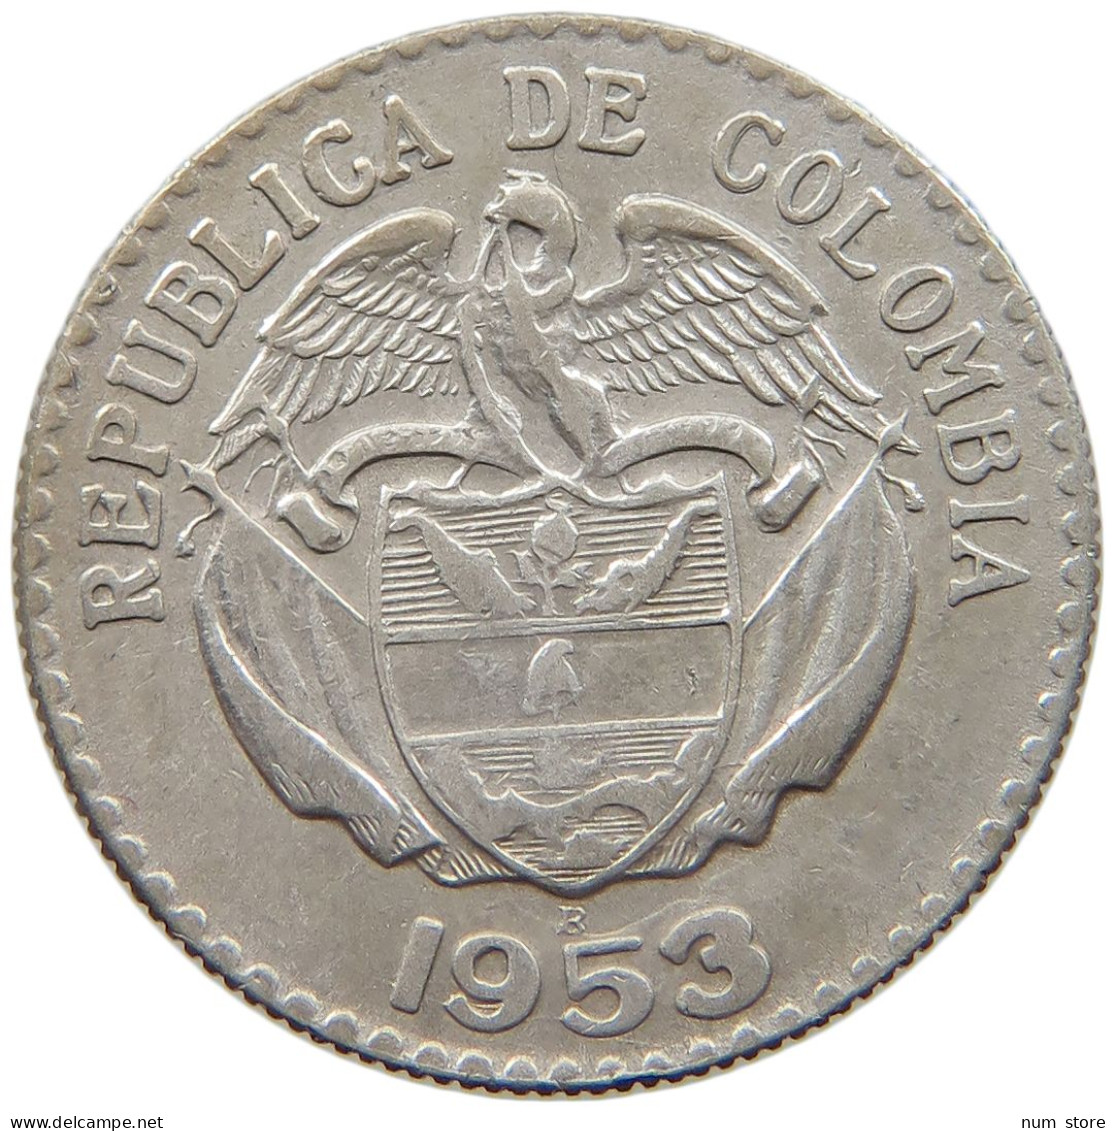 COLOMBIA 20 CENTAVOS 1953  #MA 025981 - Colombia